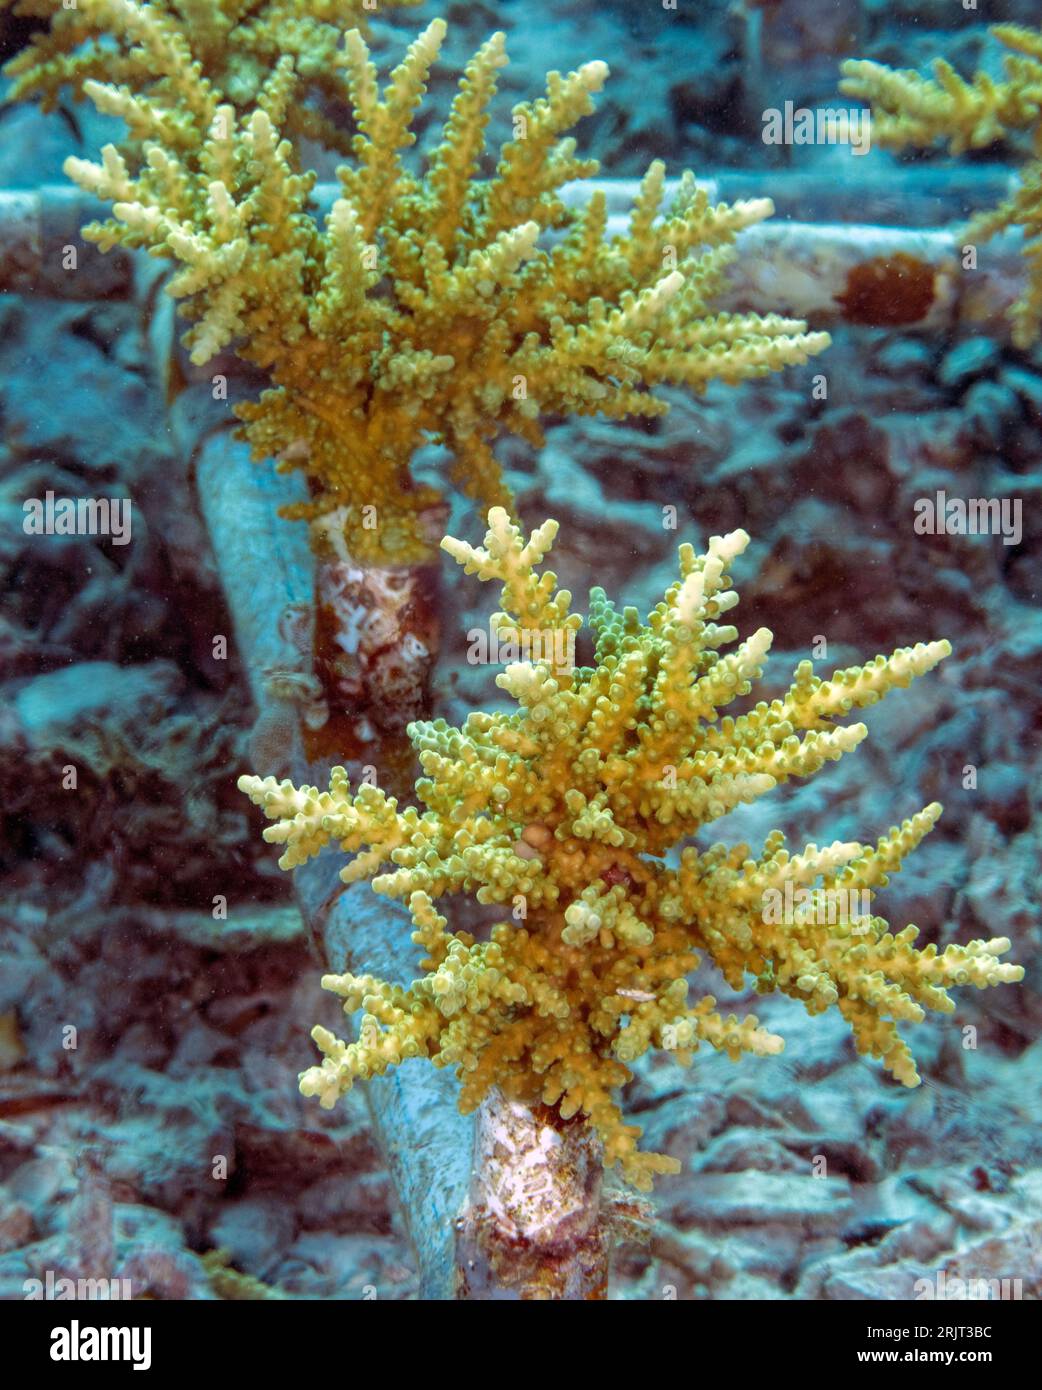 Acrapora Coral Sedlngs propogating on a Metal Frame Attached, Raja Ampat Indonesia. Stockfoto